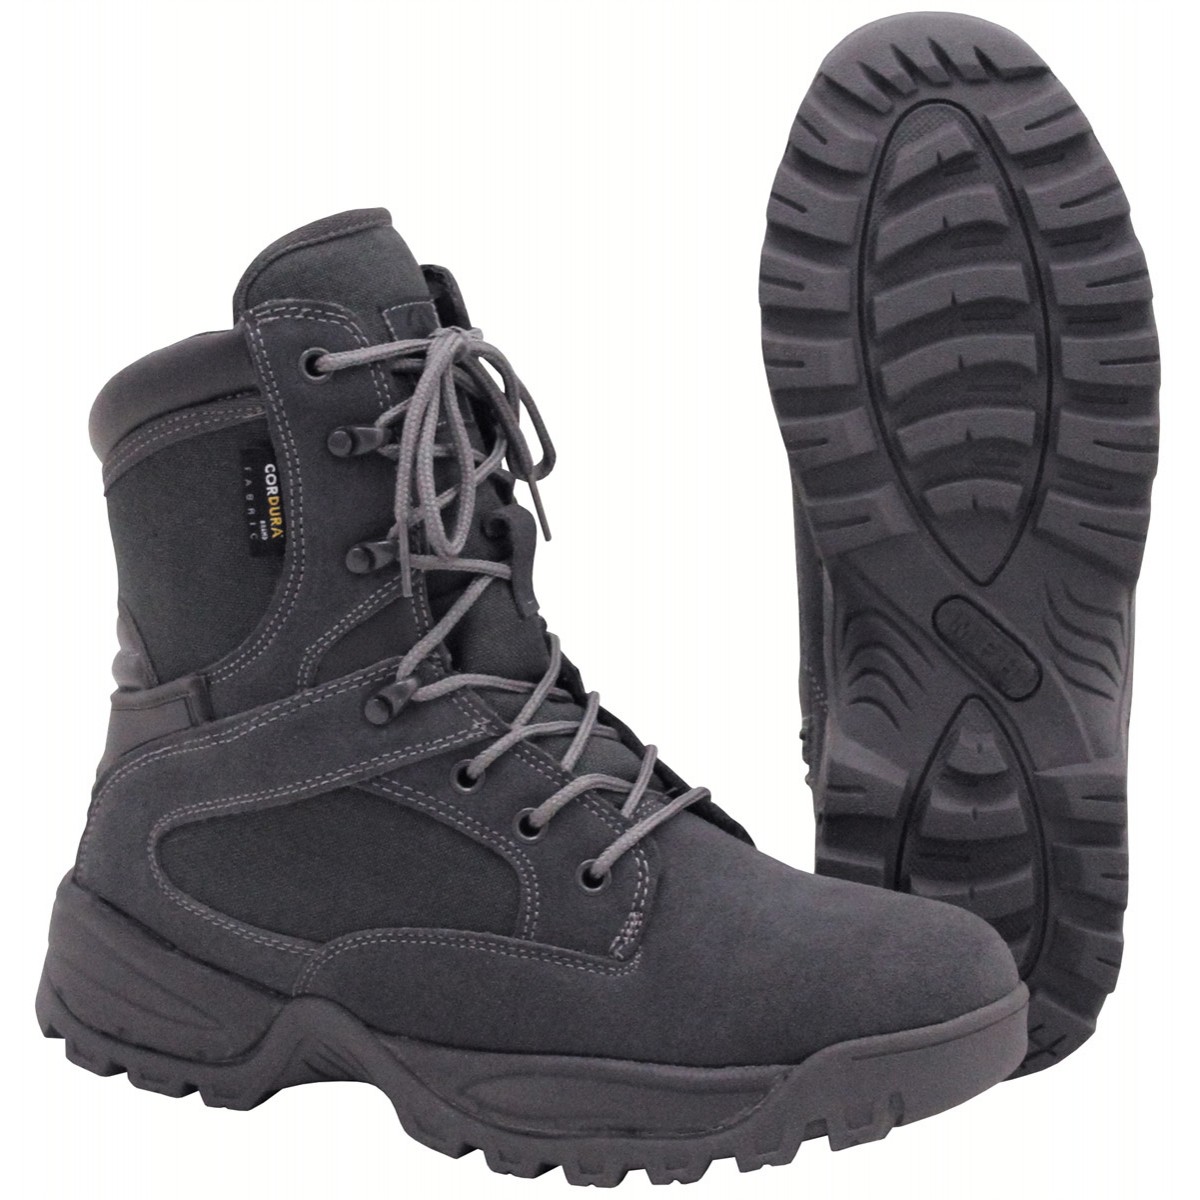 Professional Police Military Cordura Lined Boots "Mission" Black